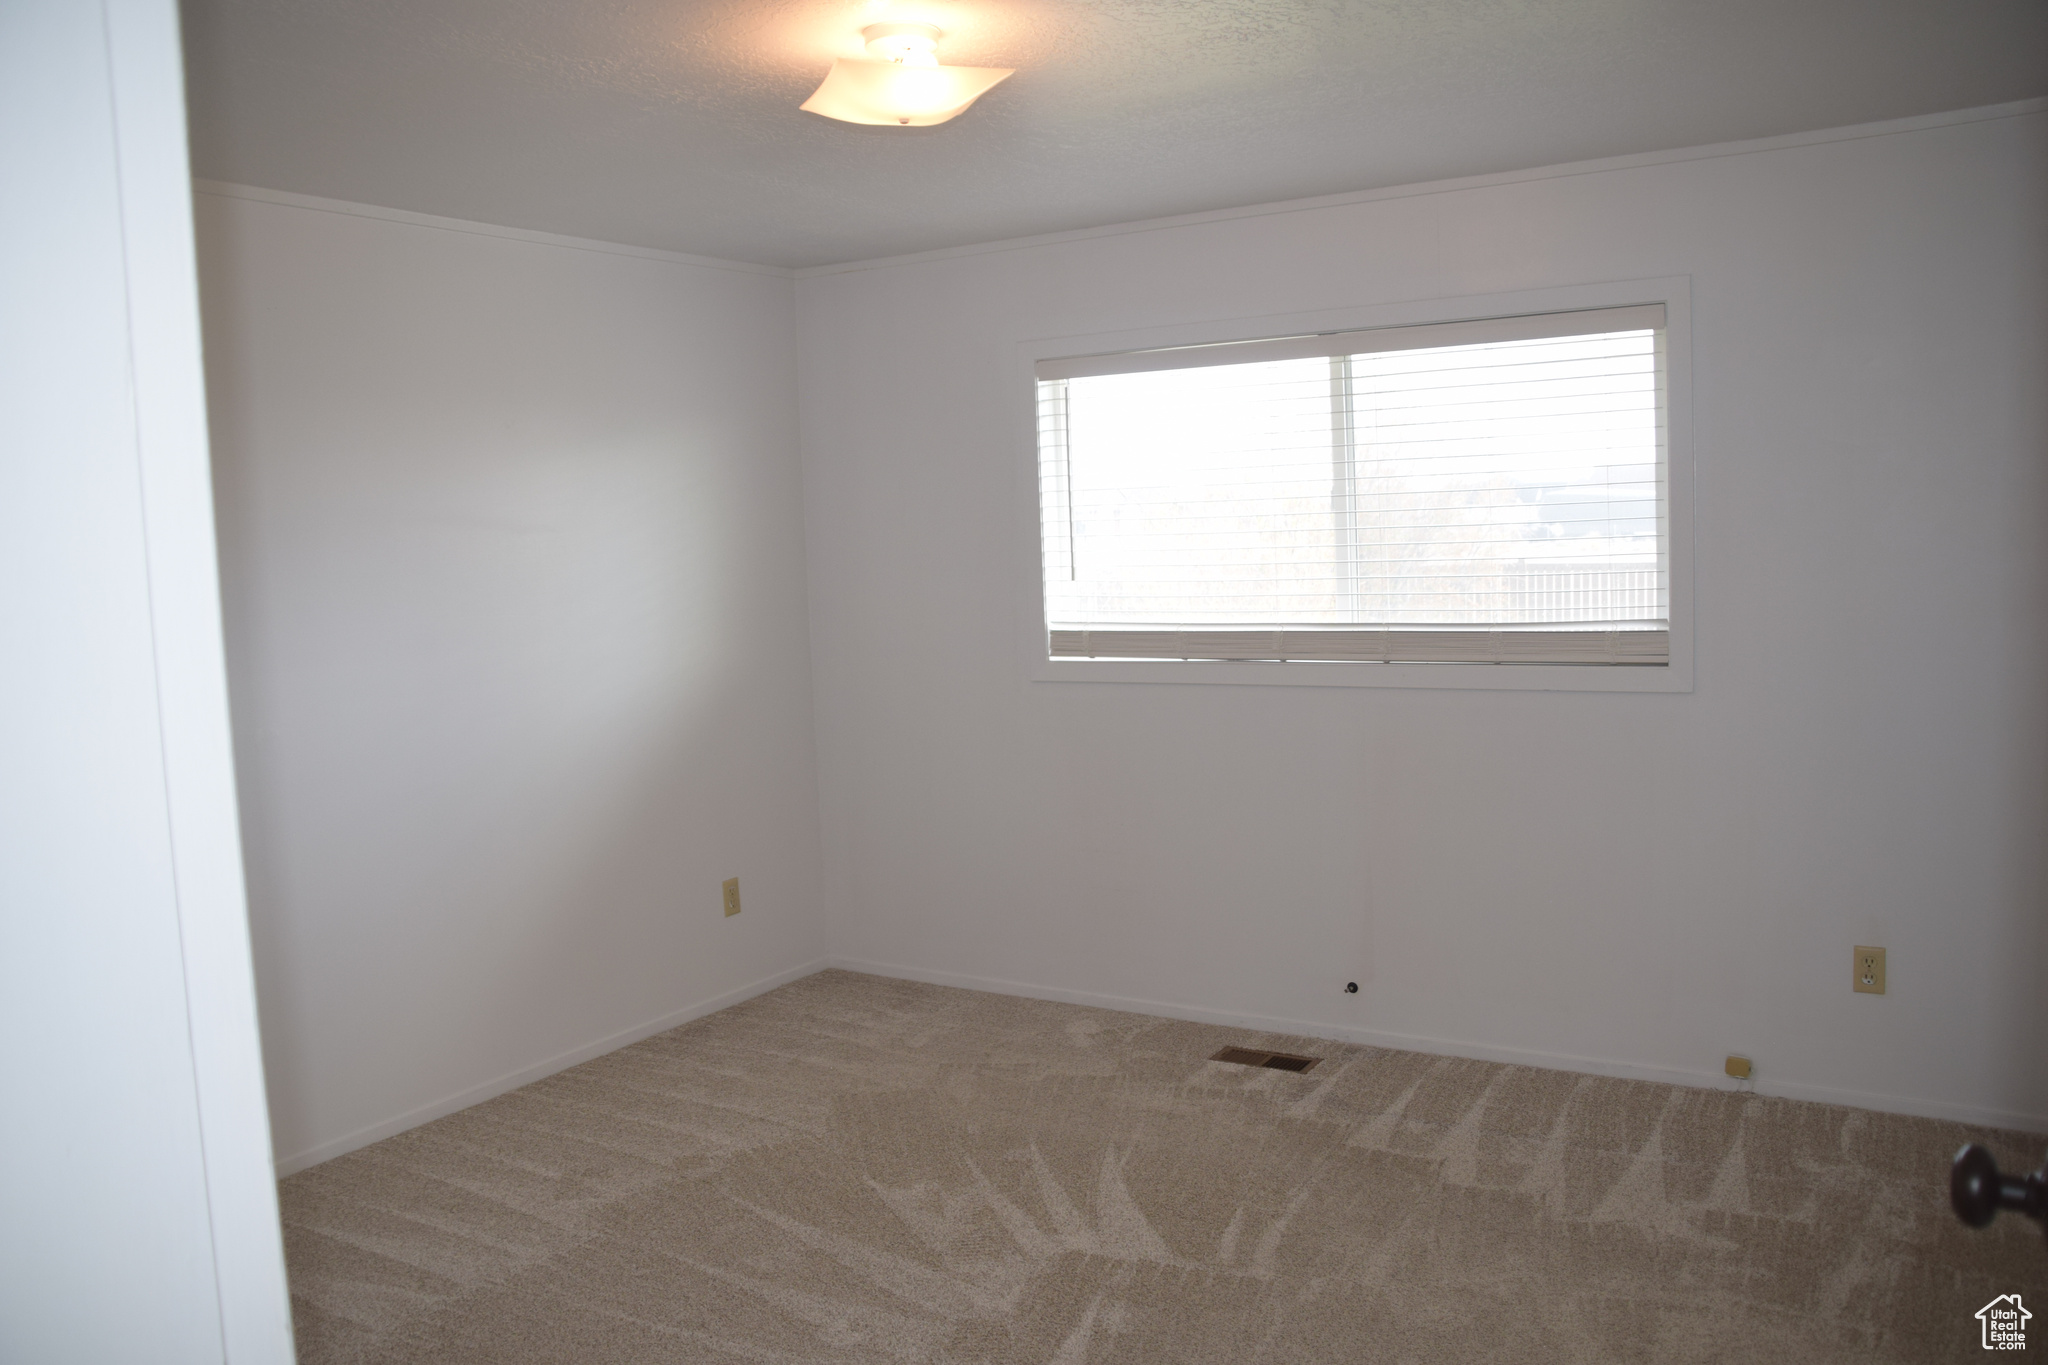 Empty room with a healthy amount of sunlight and carpet